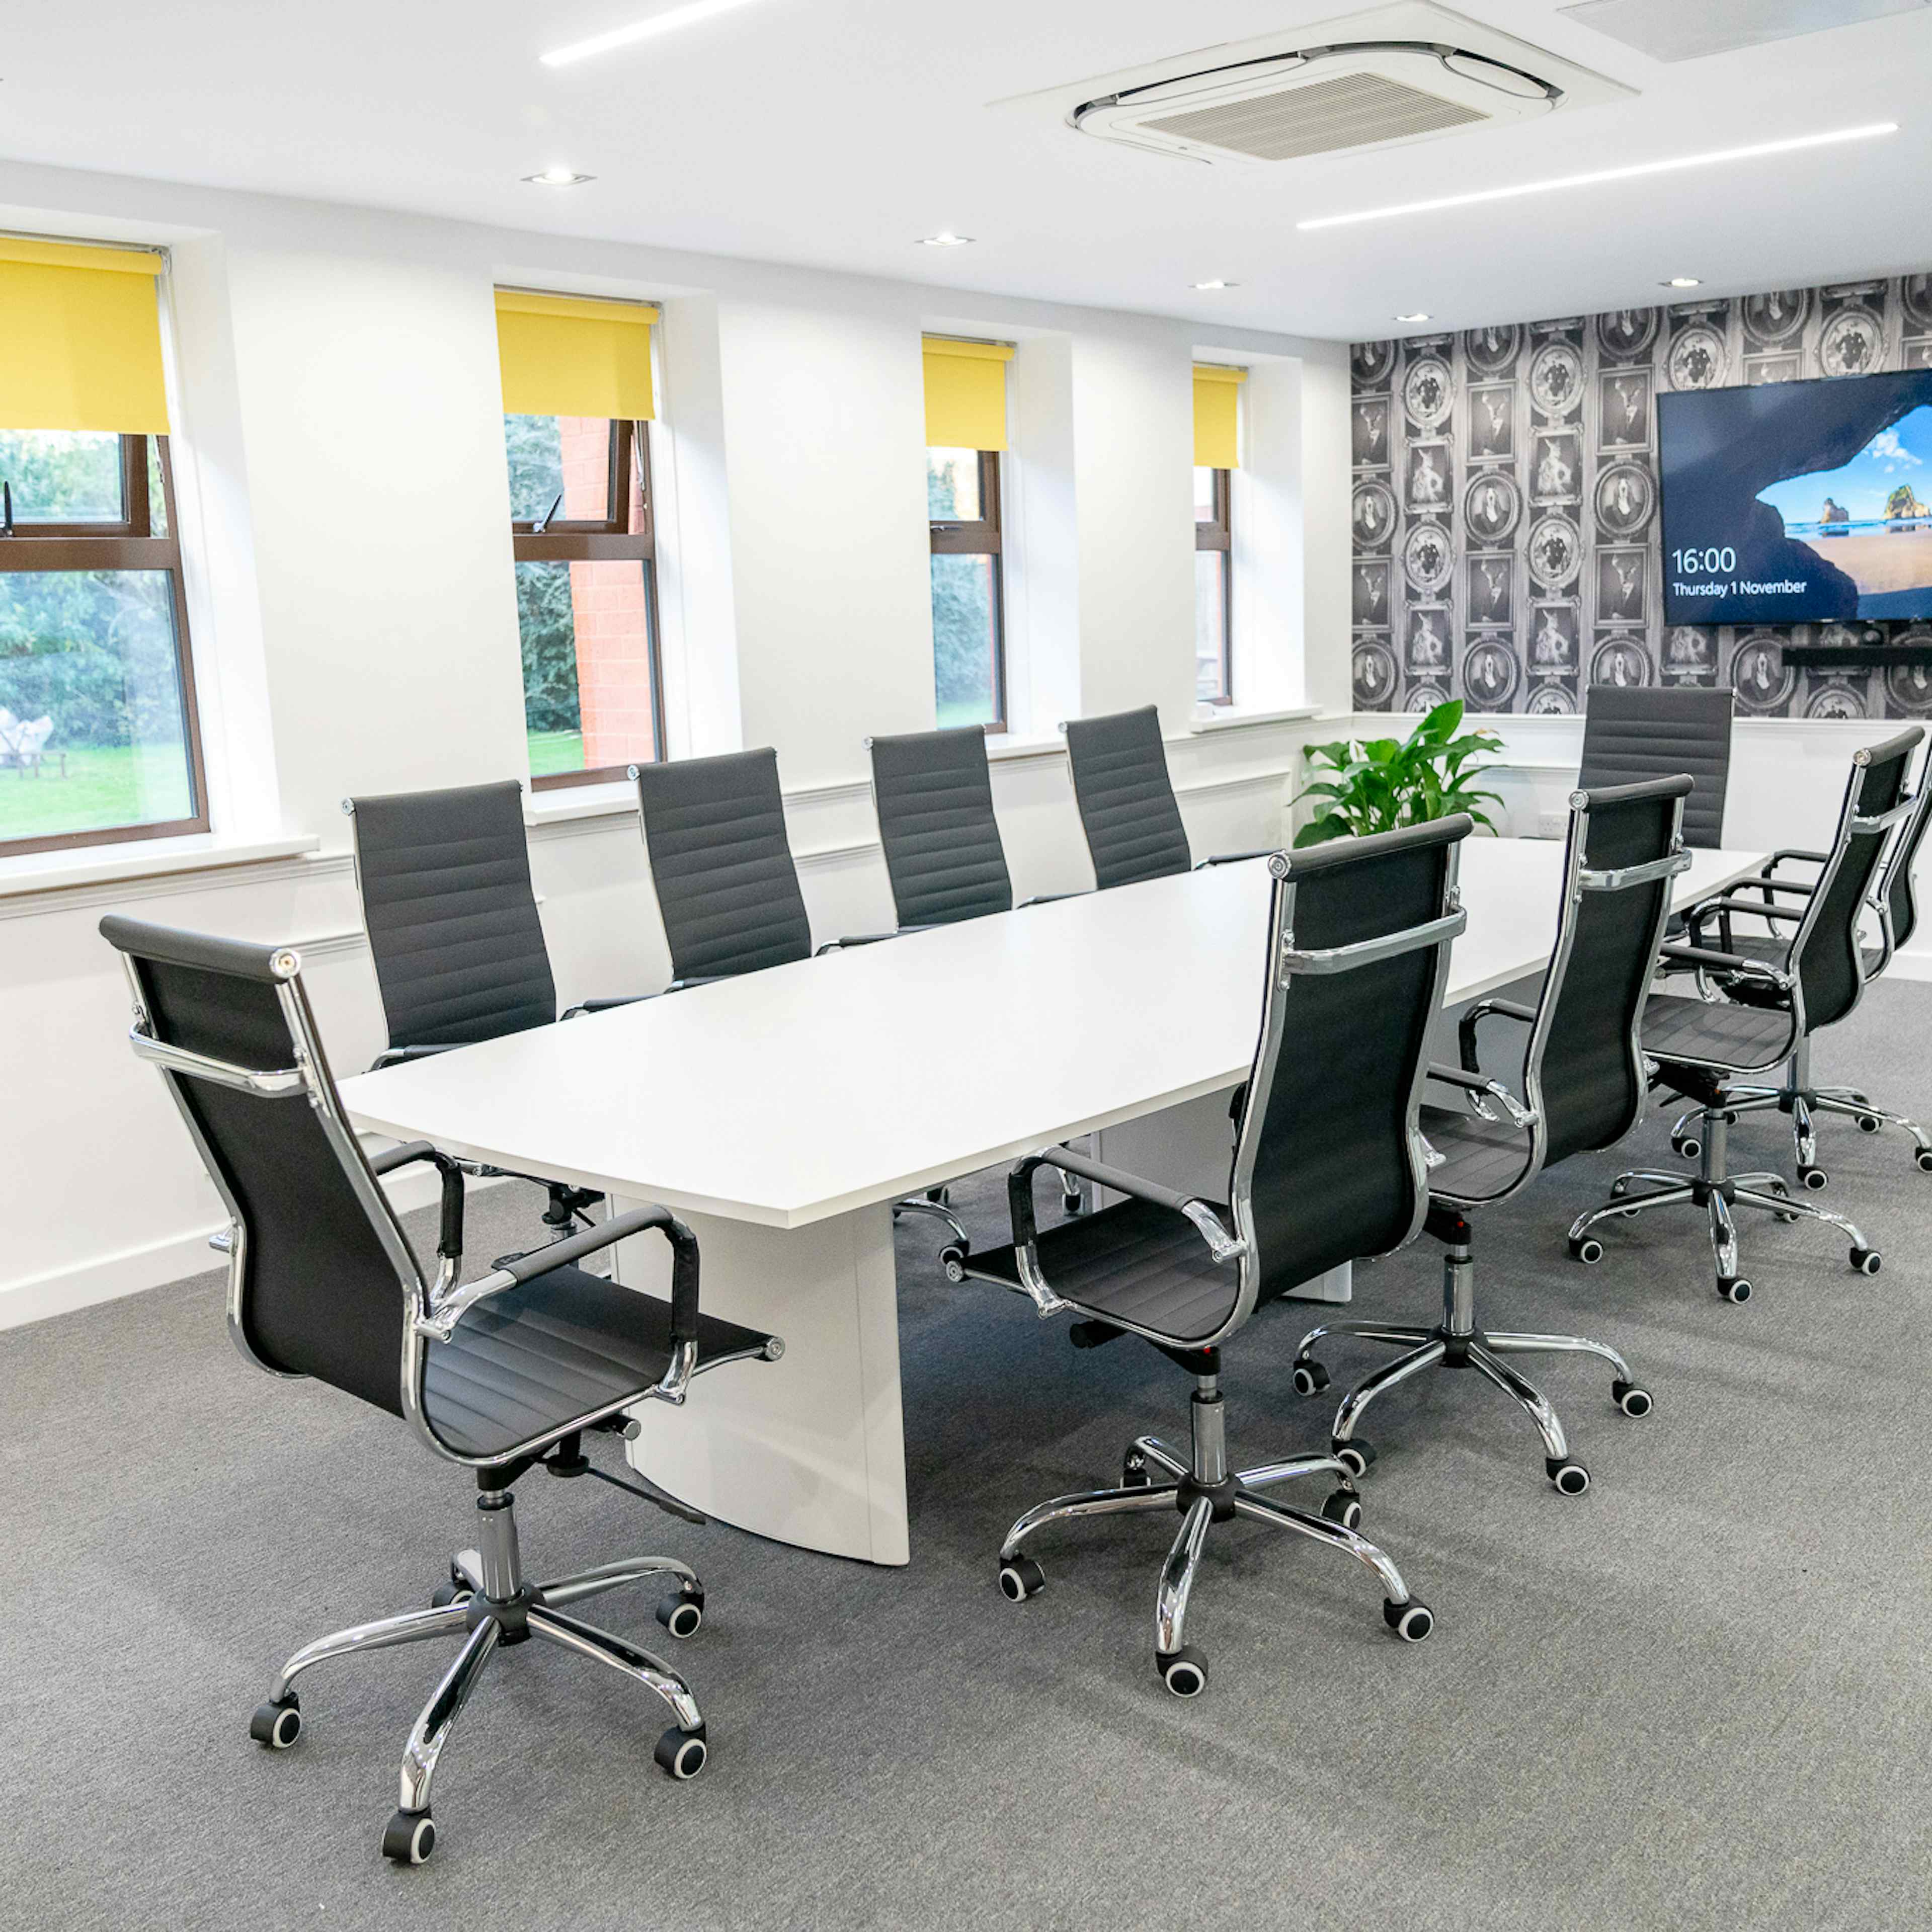 Foundry House, Widnes - Boardroom image 2